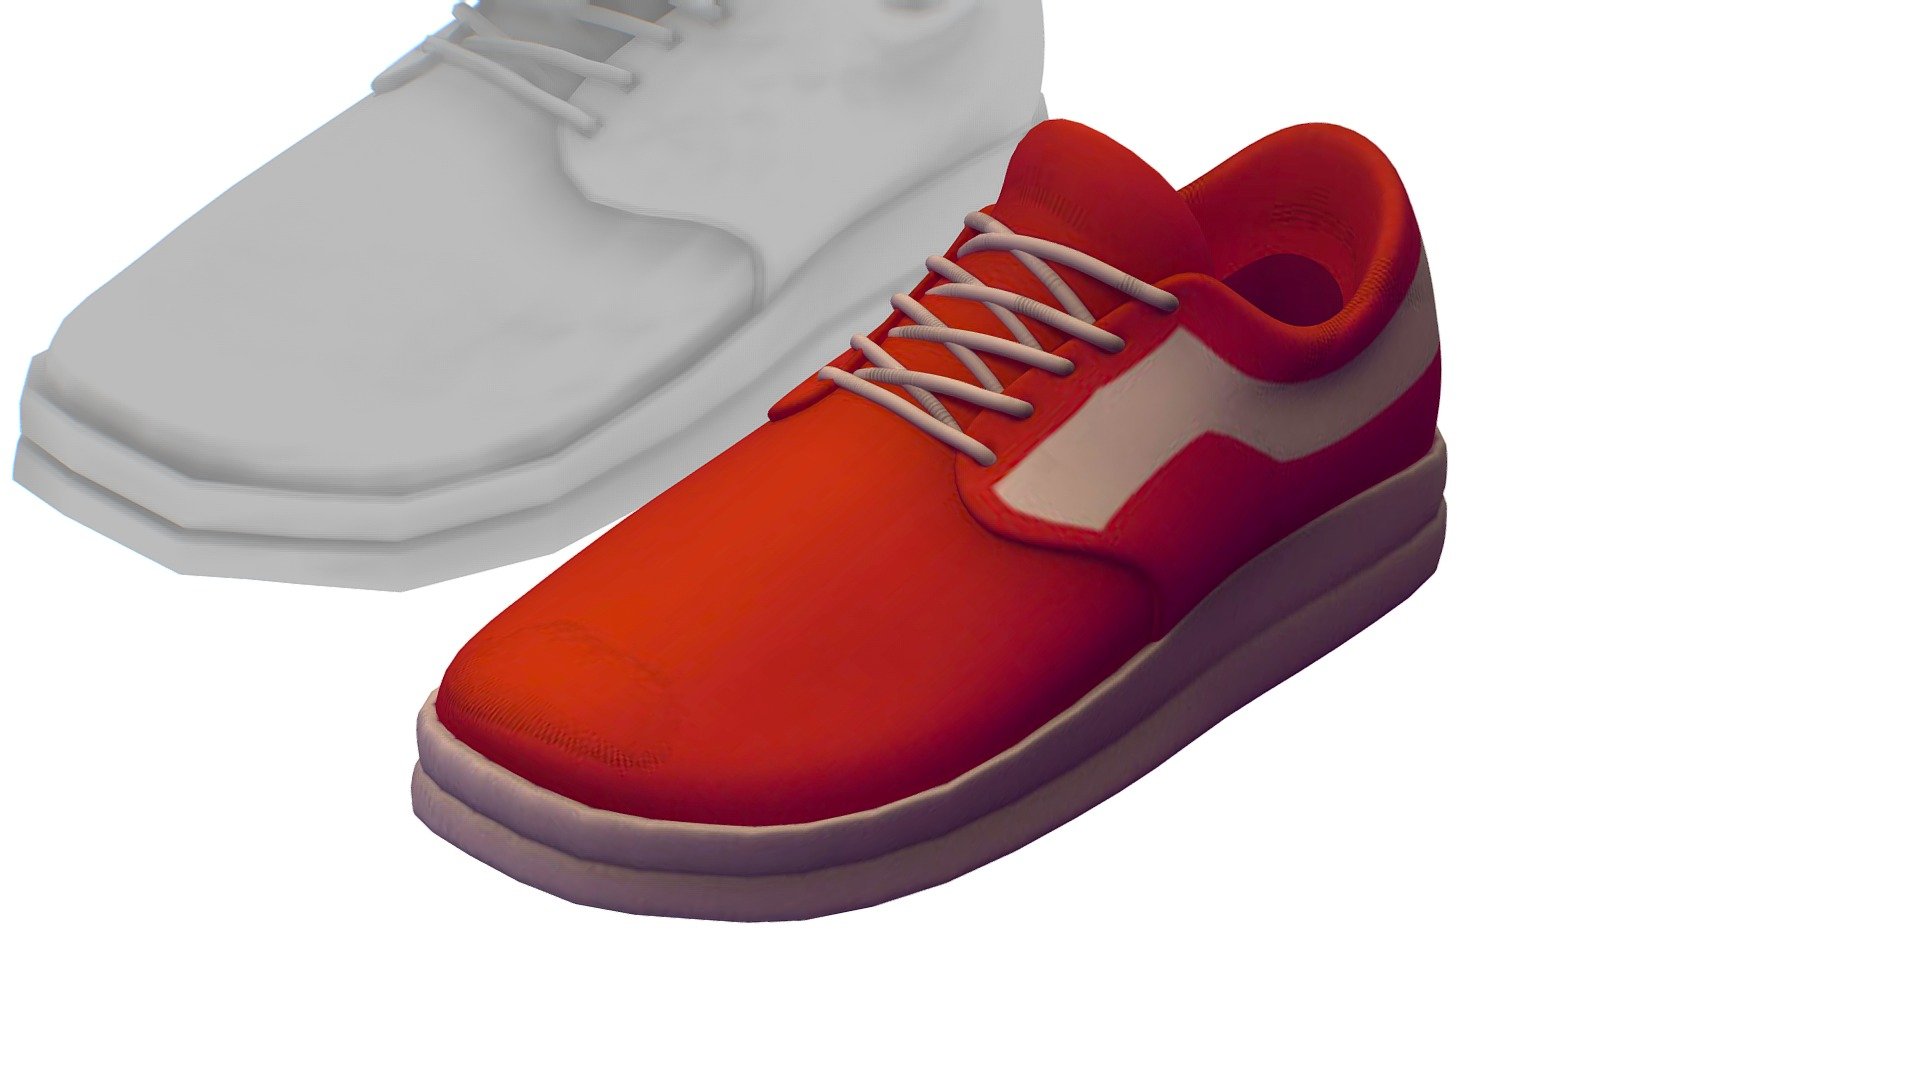 Cartoon High Poly Subdivision Red Sneakers

No HDRI map, No Light, No material settings - only Diffuse/Color Map Texture (5000x5000) 

More information about the 3D model: please use the Sketchfab Model Inspector - Key (i) - Cartoon High Poly Subdivision Red Sneakers - Buy Royalty Free 3D model by Oleg Shuldiakov (@olegshuldiakov) 3d model